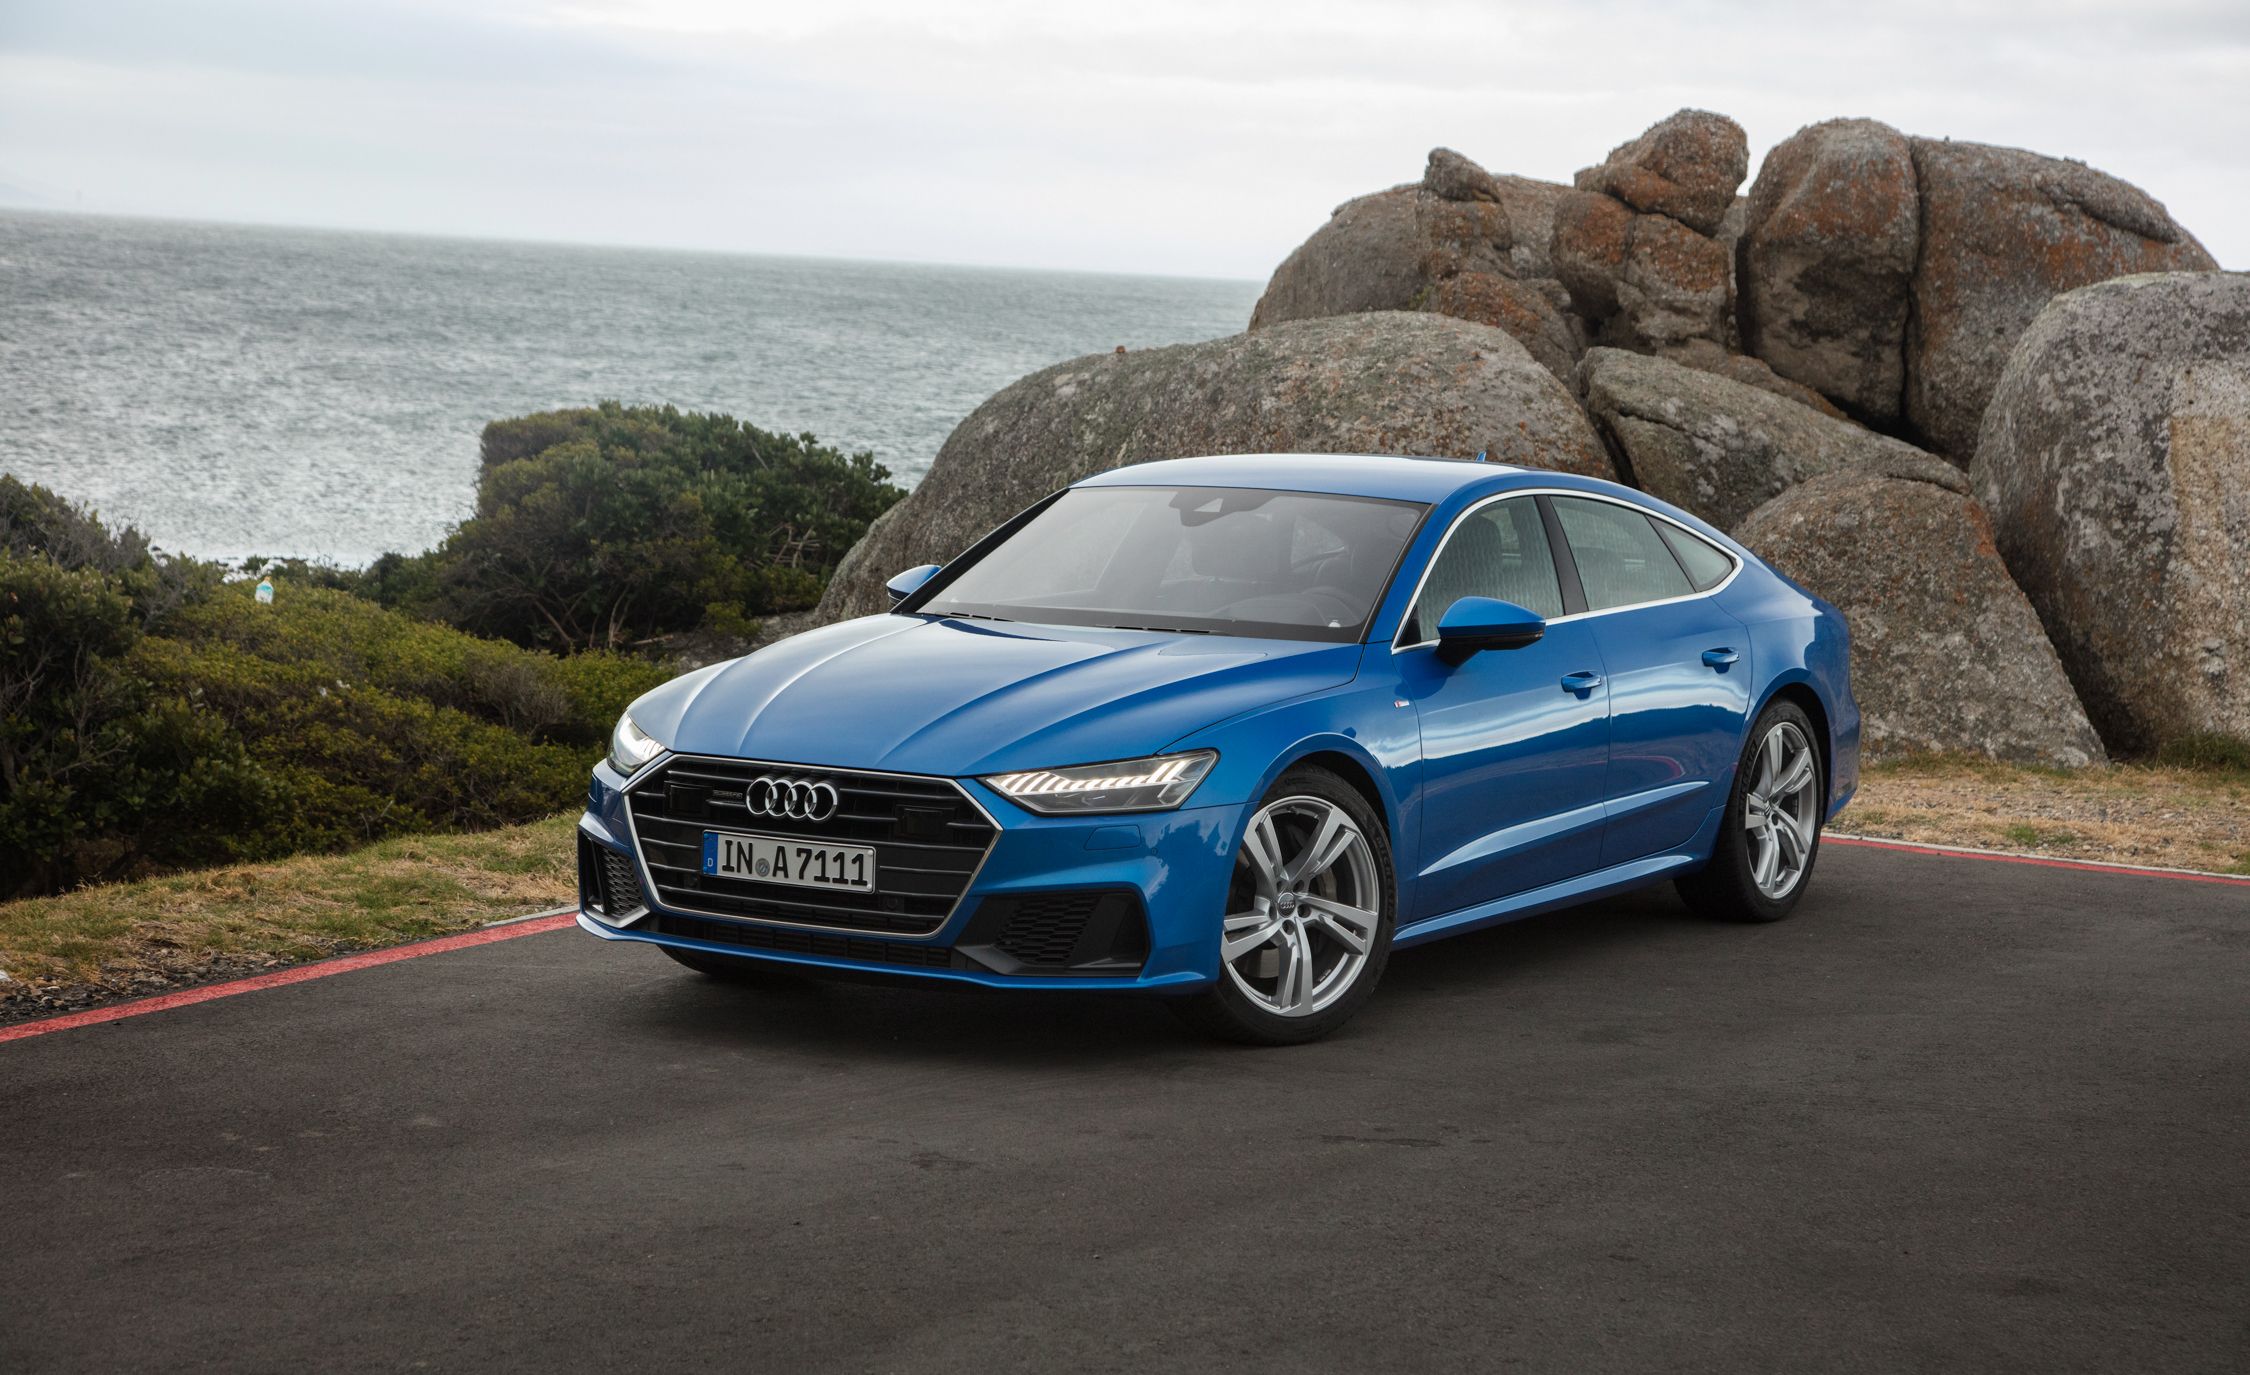 Audi A7 Reviews Audi A7 Price, Photos, and Specs Car and Driver